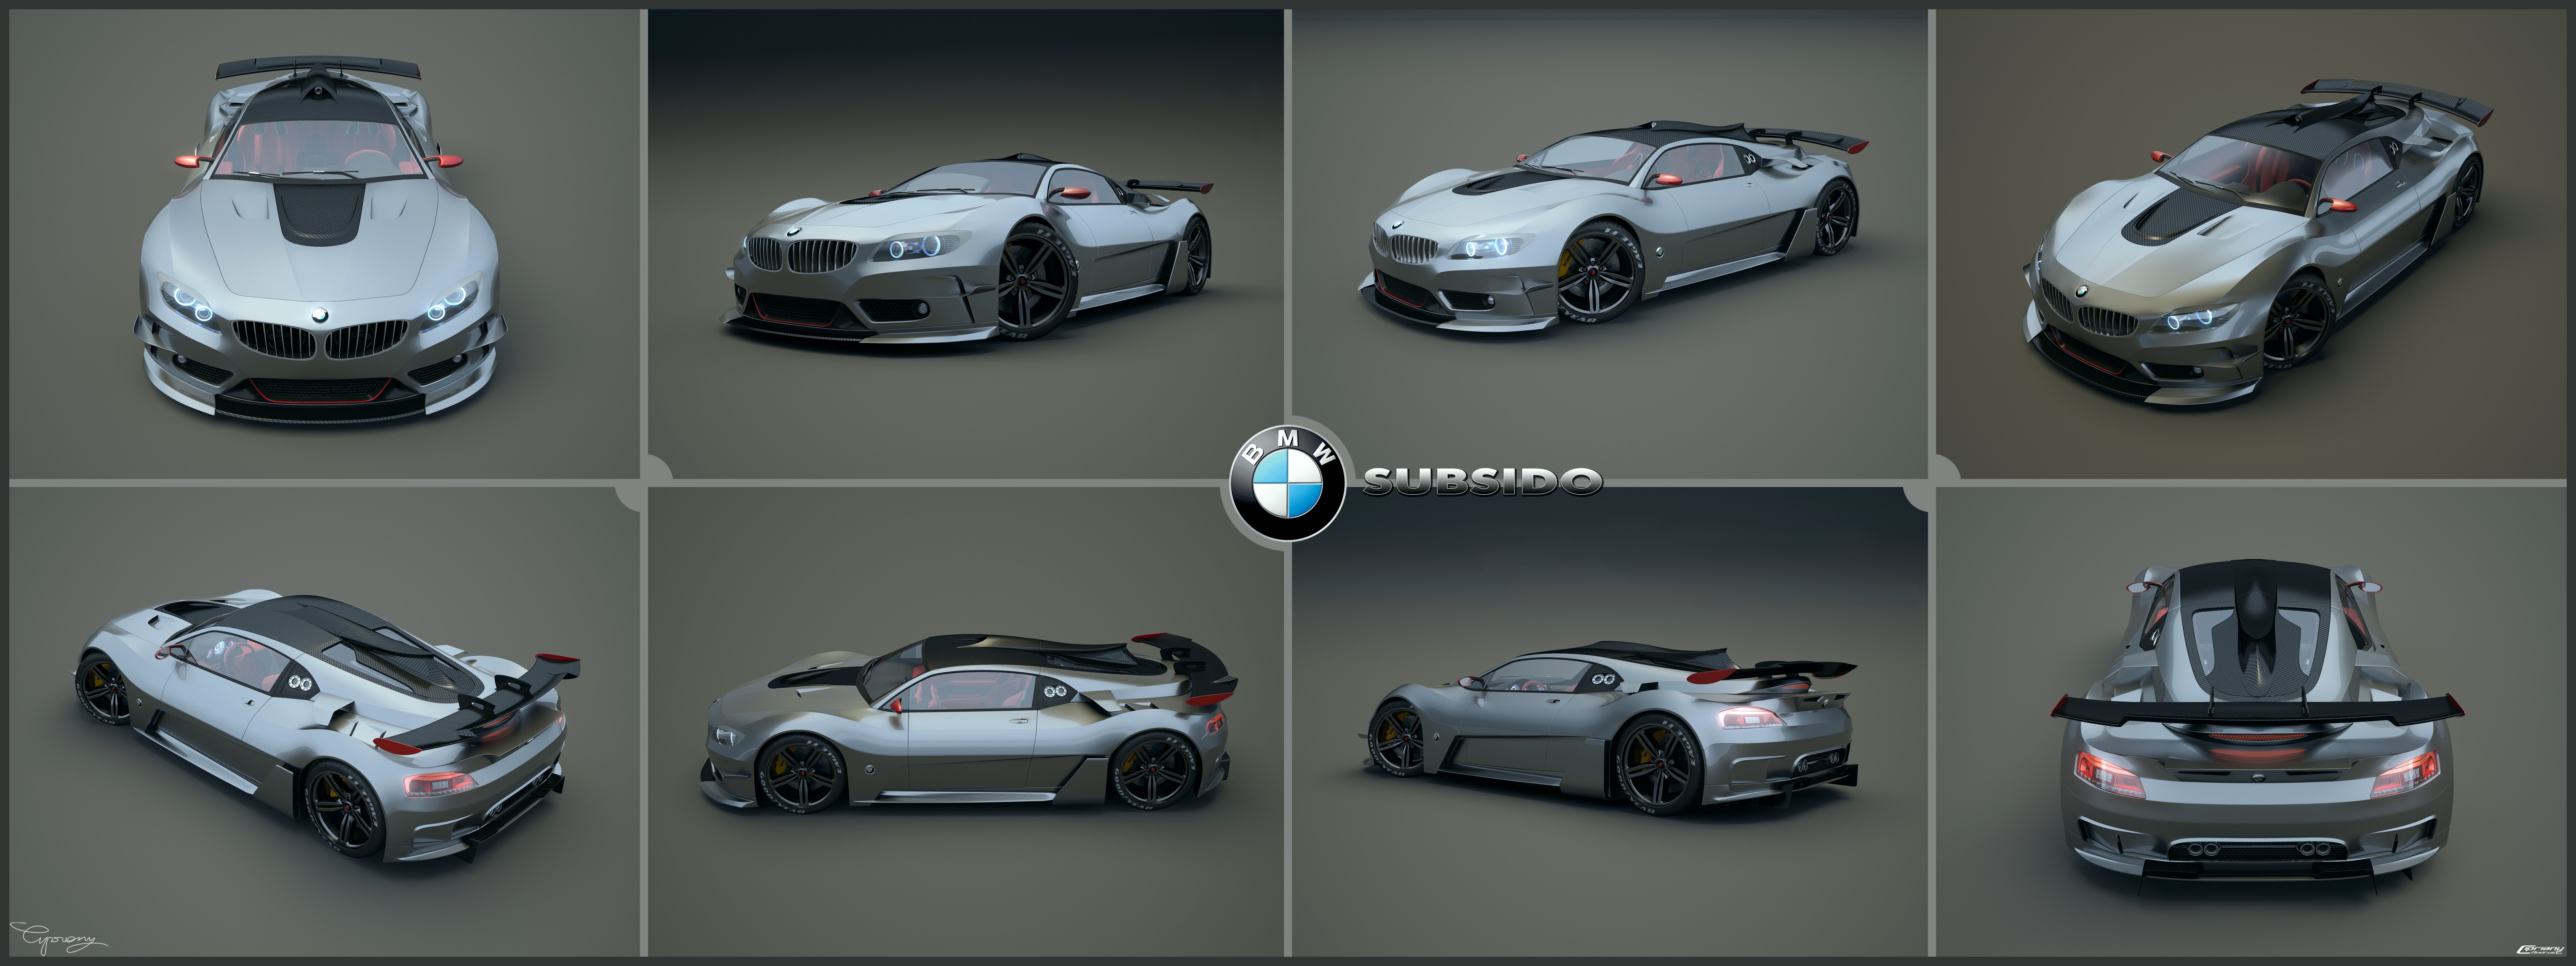 Bmw Subsido Concept High Quality Background on Wallpapers Vista